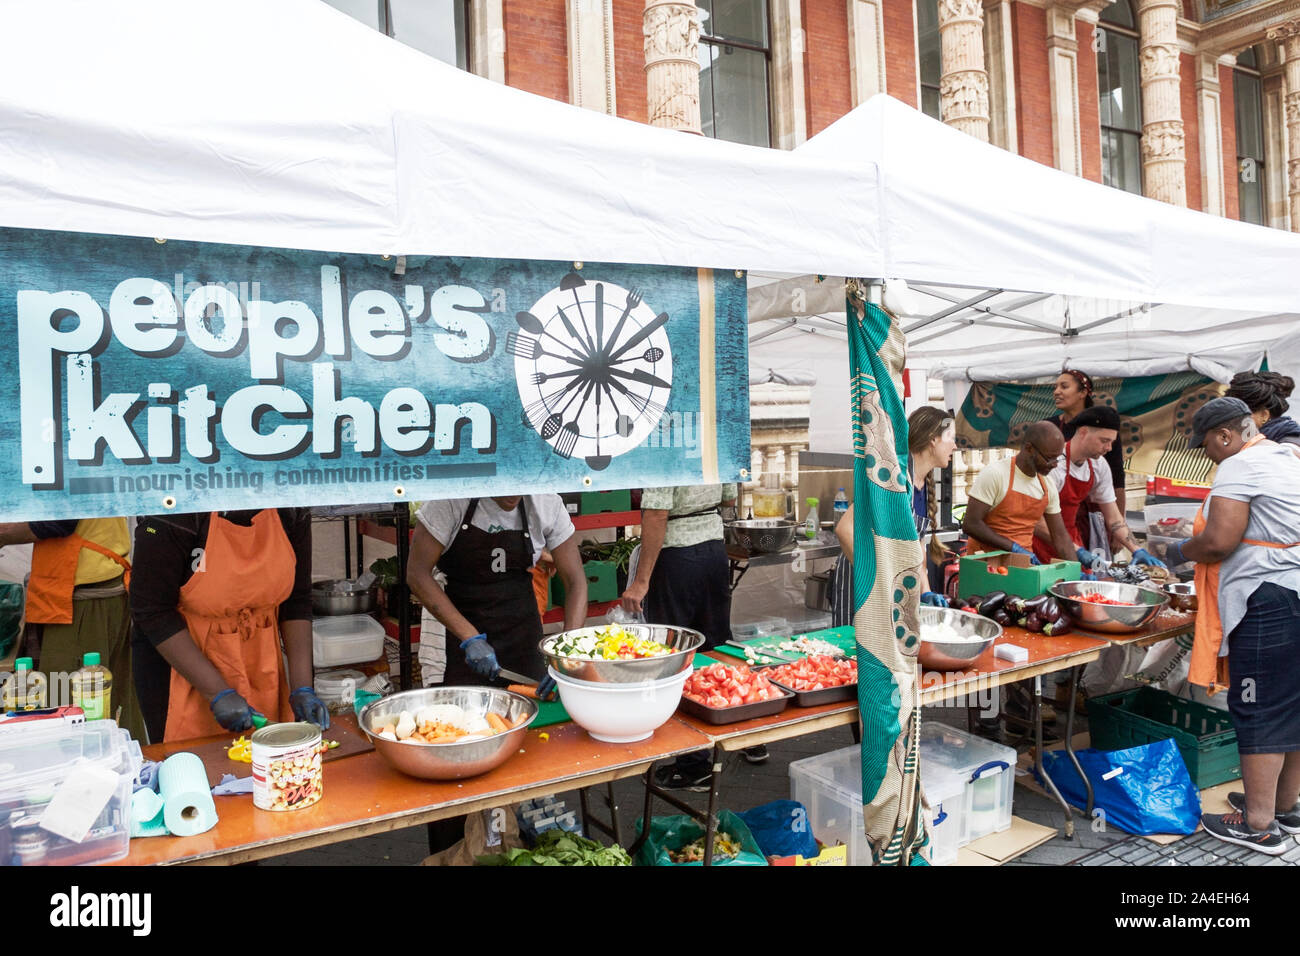 The Peoples Kitchen: turning food waste into community feasts. London, UK. Food waste recycling. Stock Photo